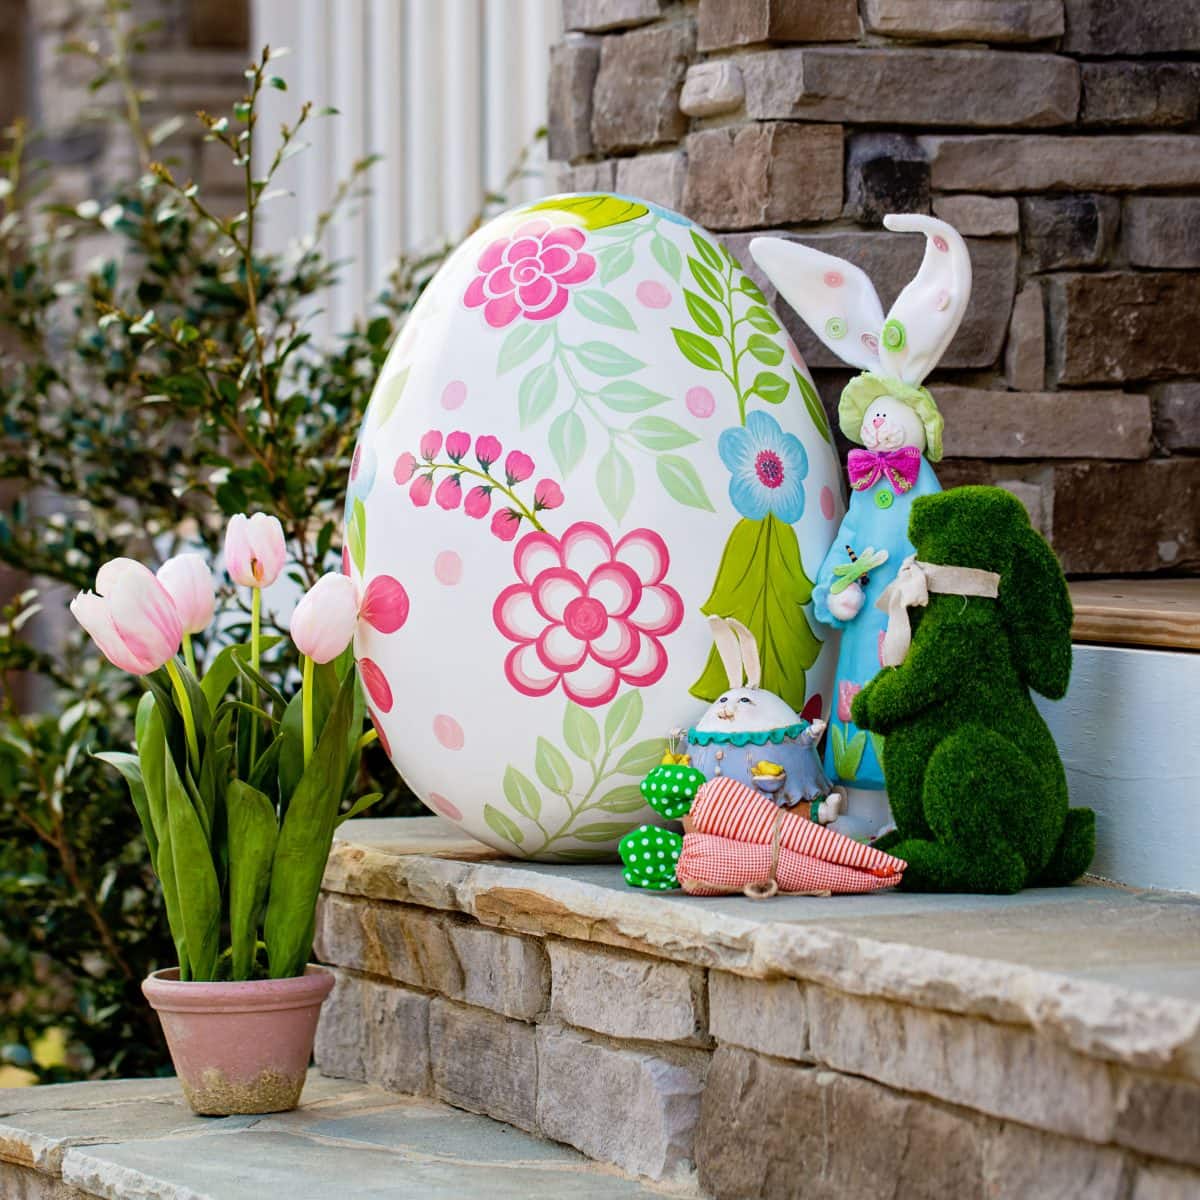 Spring Decor To Update Your Home’S Interior And Exterior